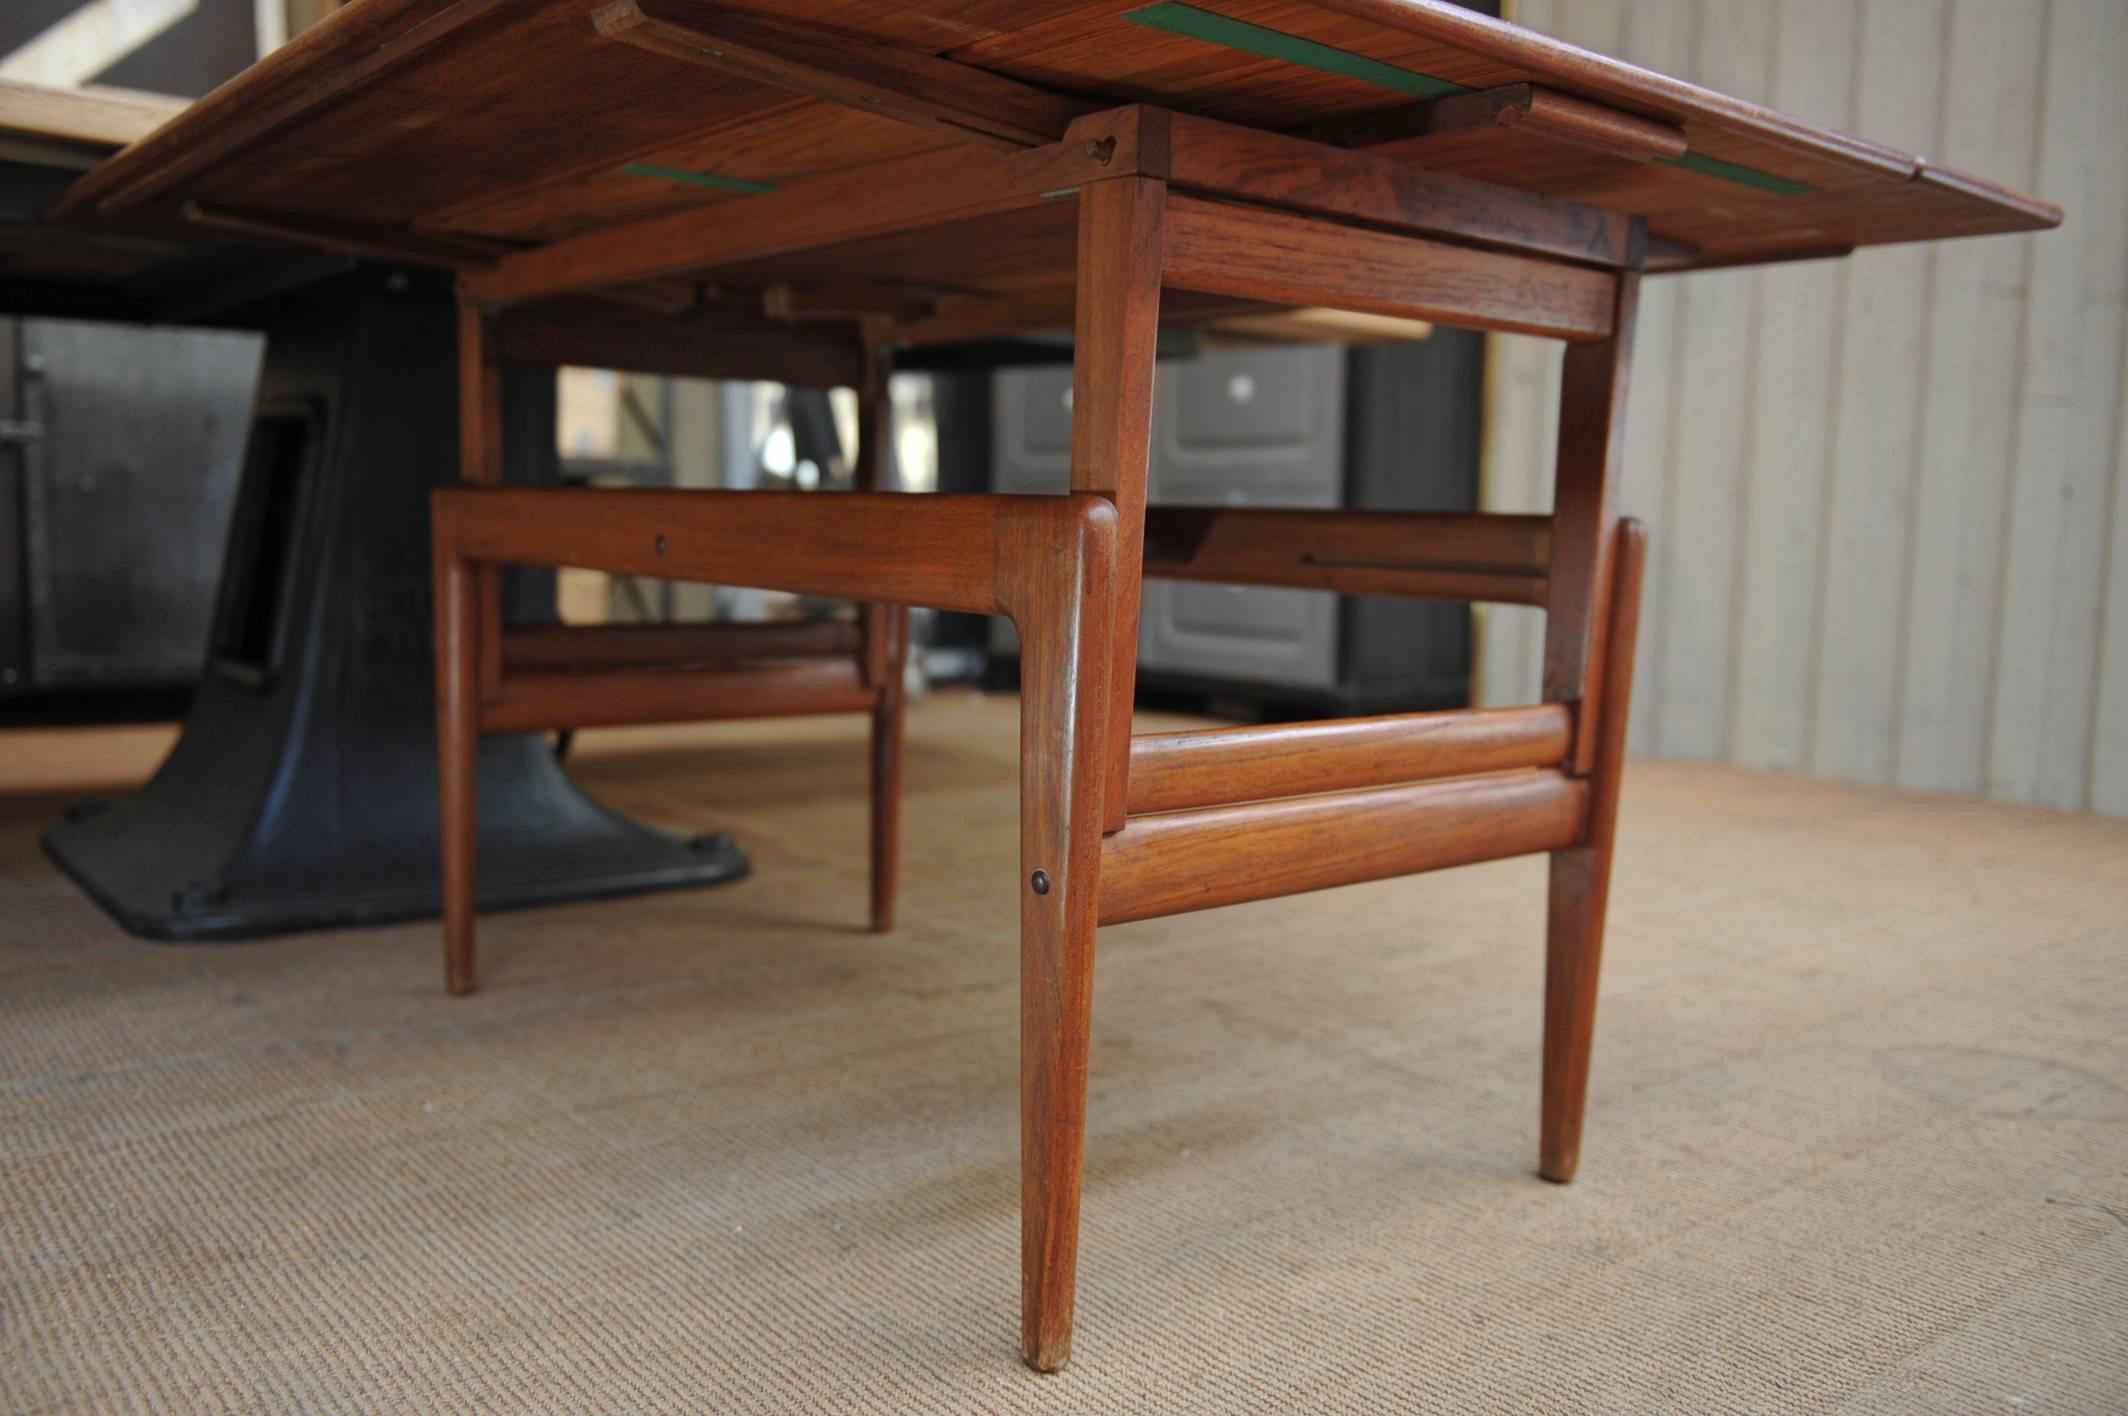 Mid-20th Century Scandinavian System Dining and Coffee Table with Inside Extensions by Samcom For Sale